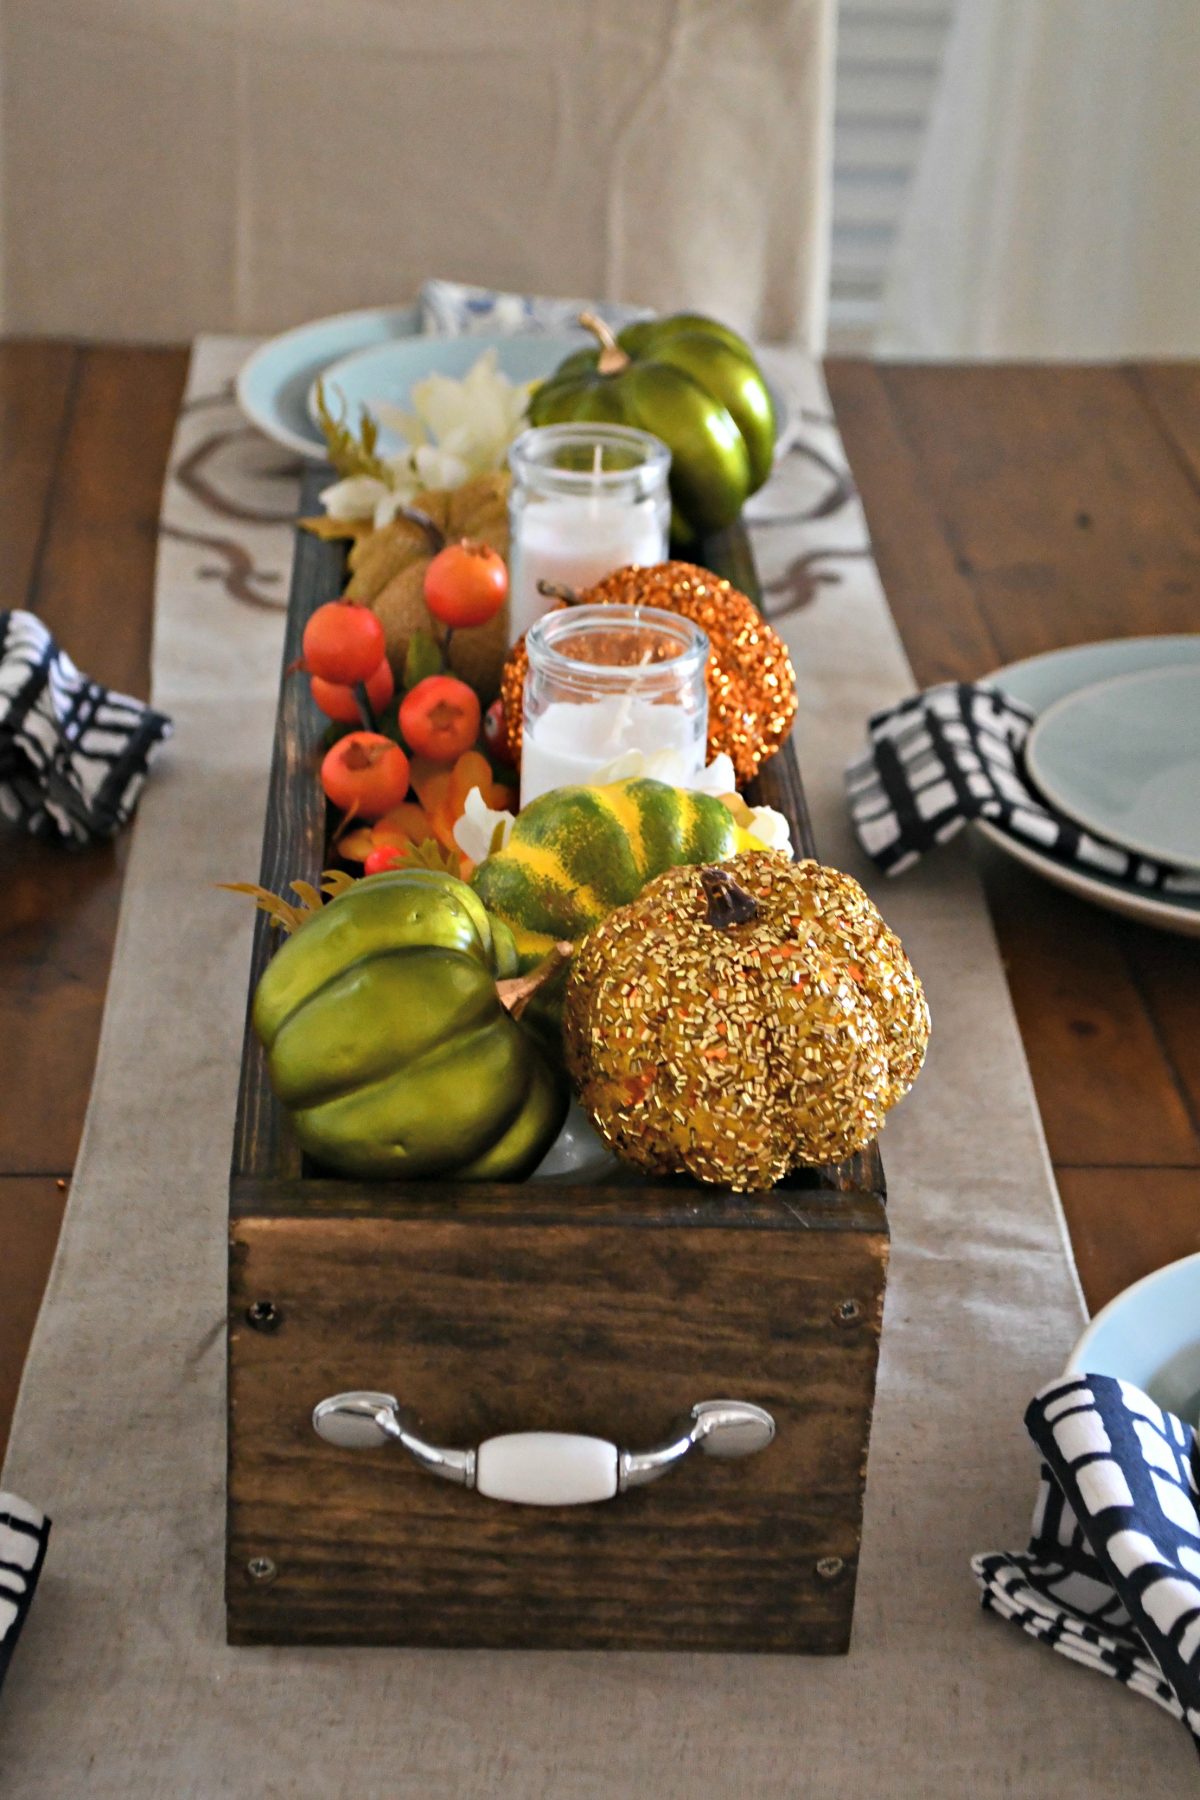 dollar tree fall centerpiece - one of my looks uses a fun assortment of pumpkins, greenery, and candles